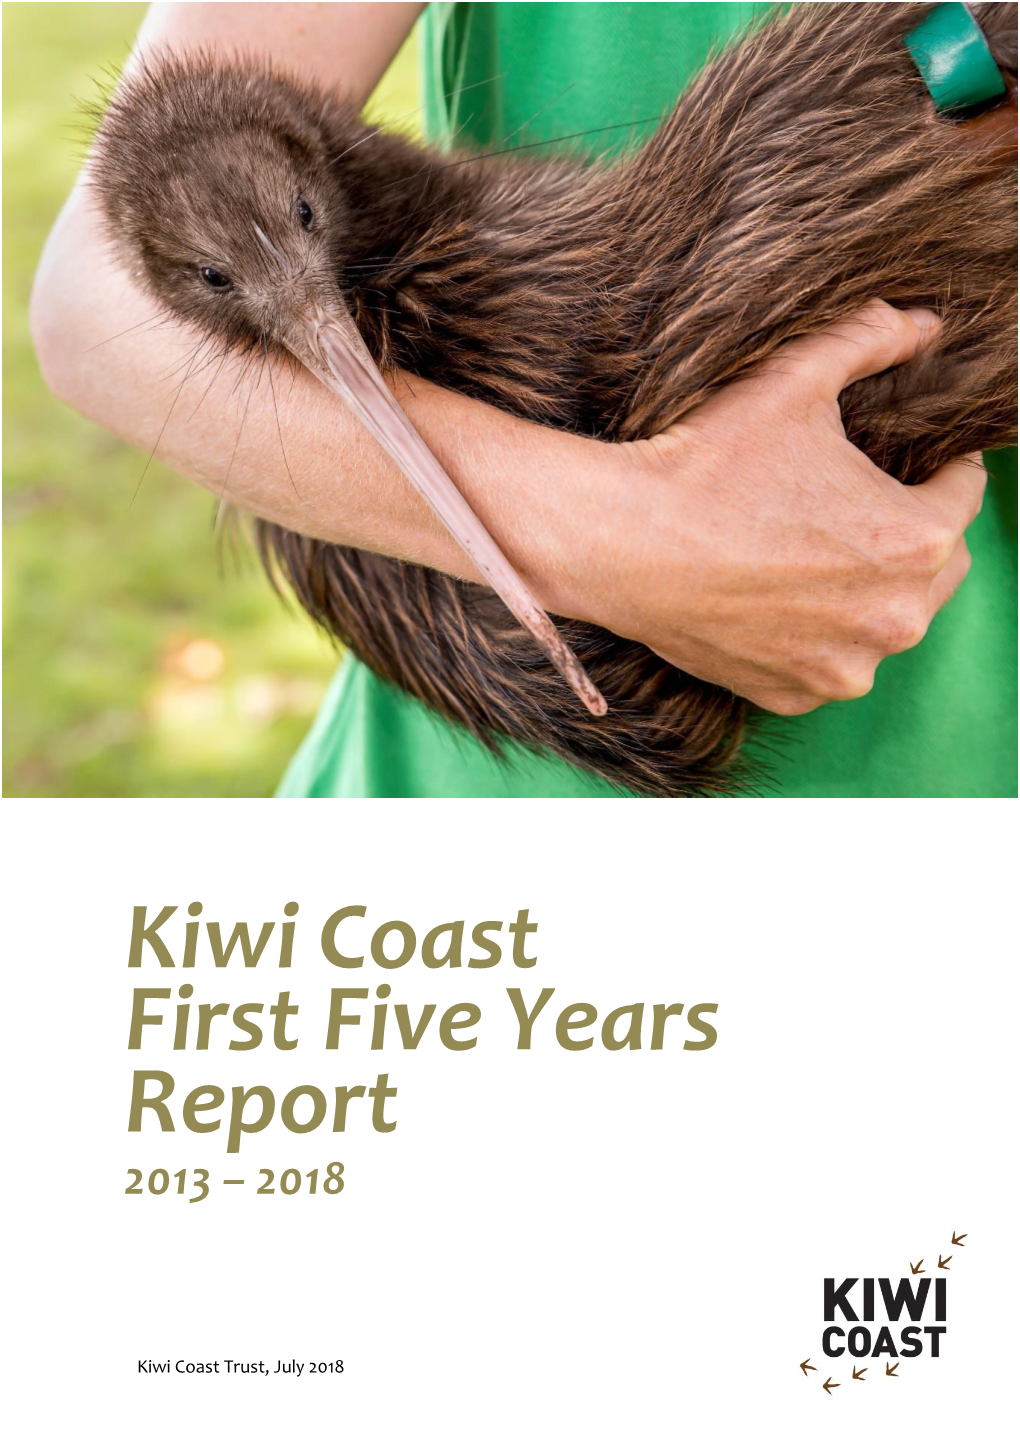 First Five Years Report 2013 – 2018